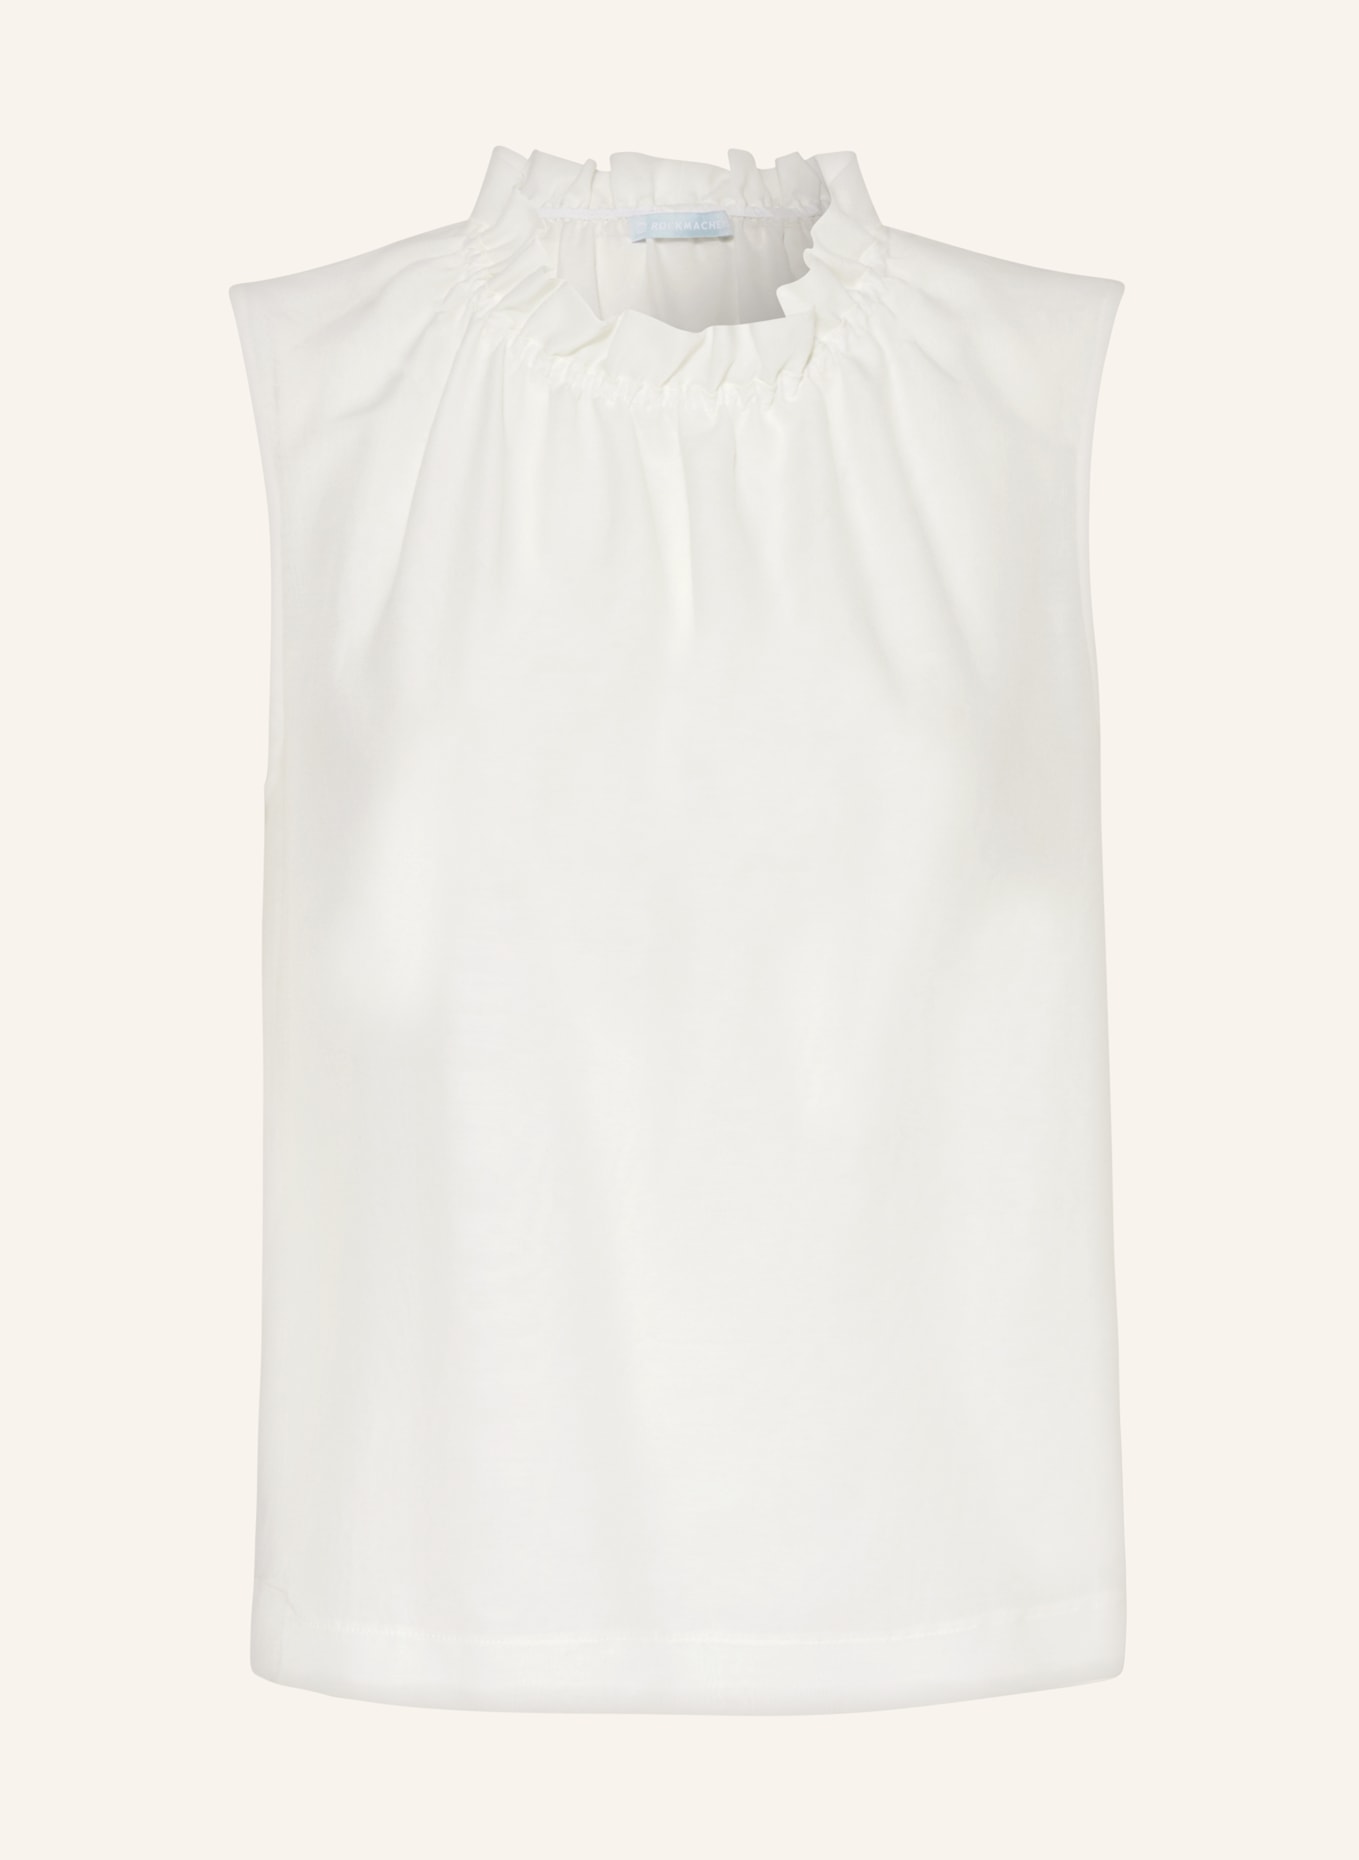 ROCKMACHERIN Blouse top EDDA with ruffles, Color: WHITE (Image 1)